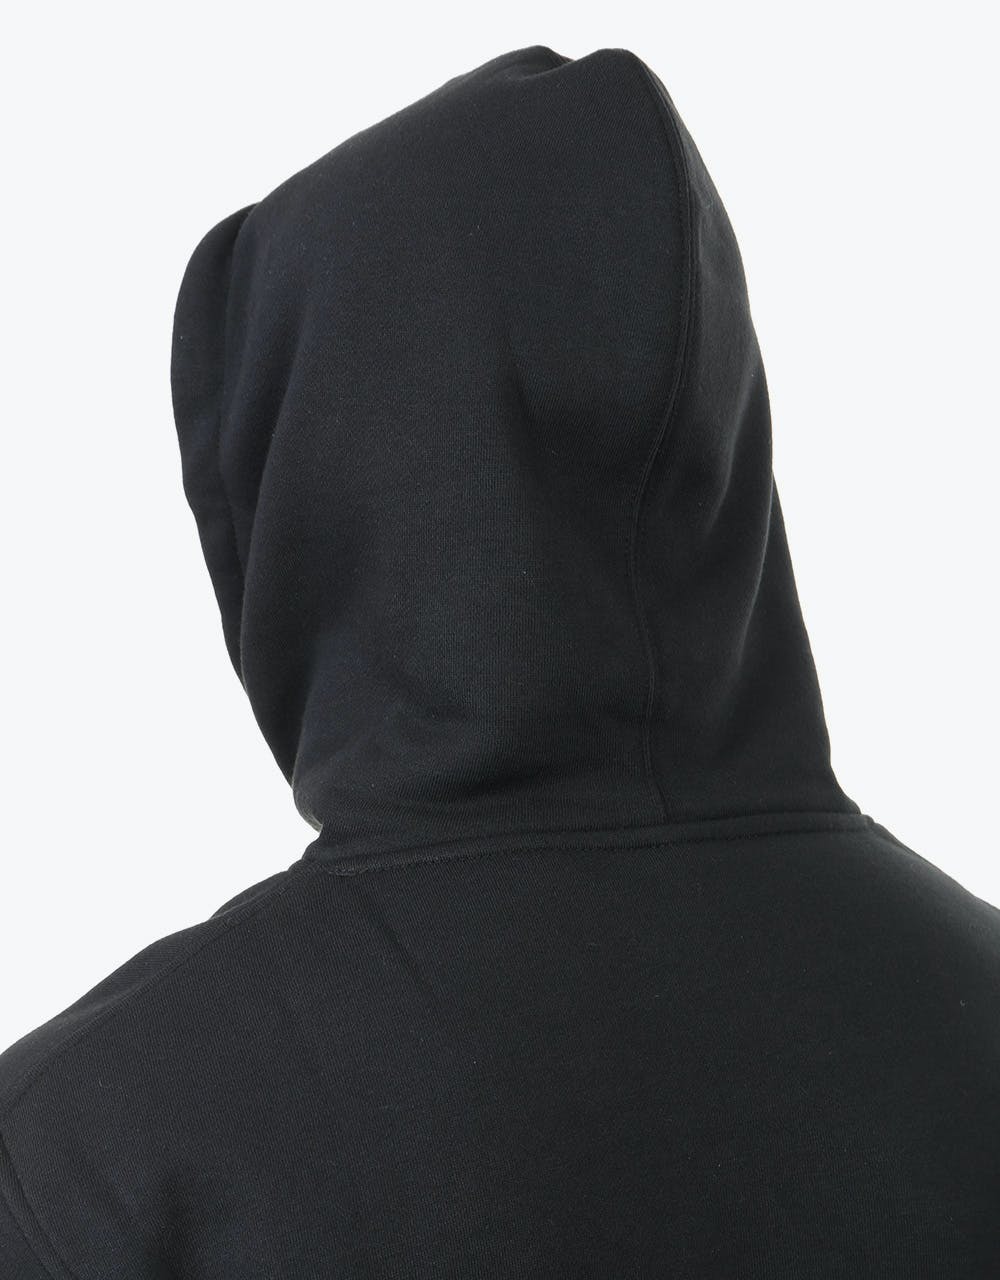 Independent Shear Pullover Hoodie - Black